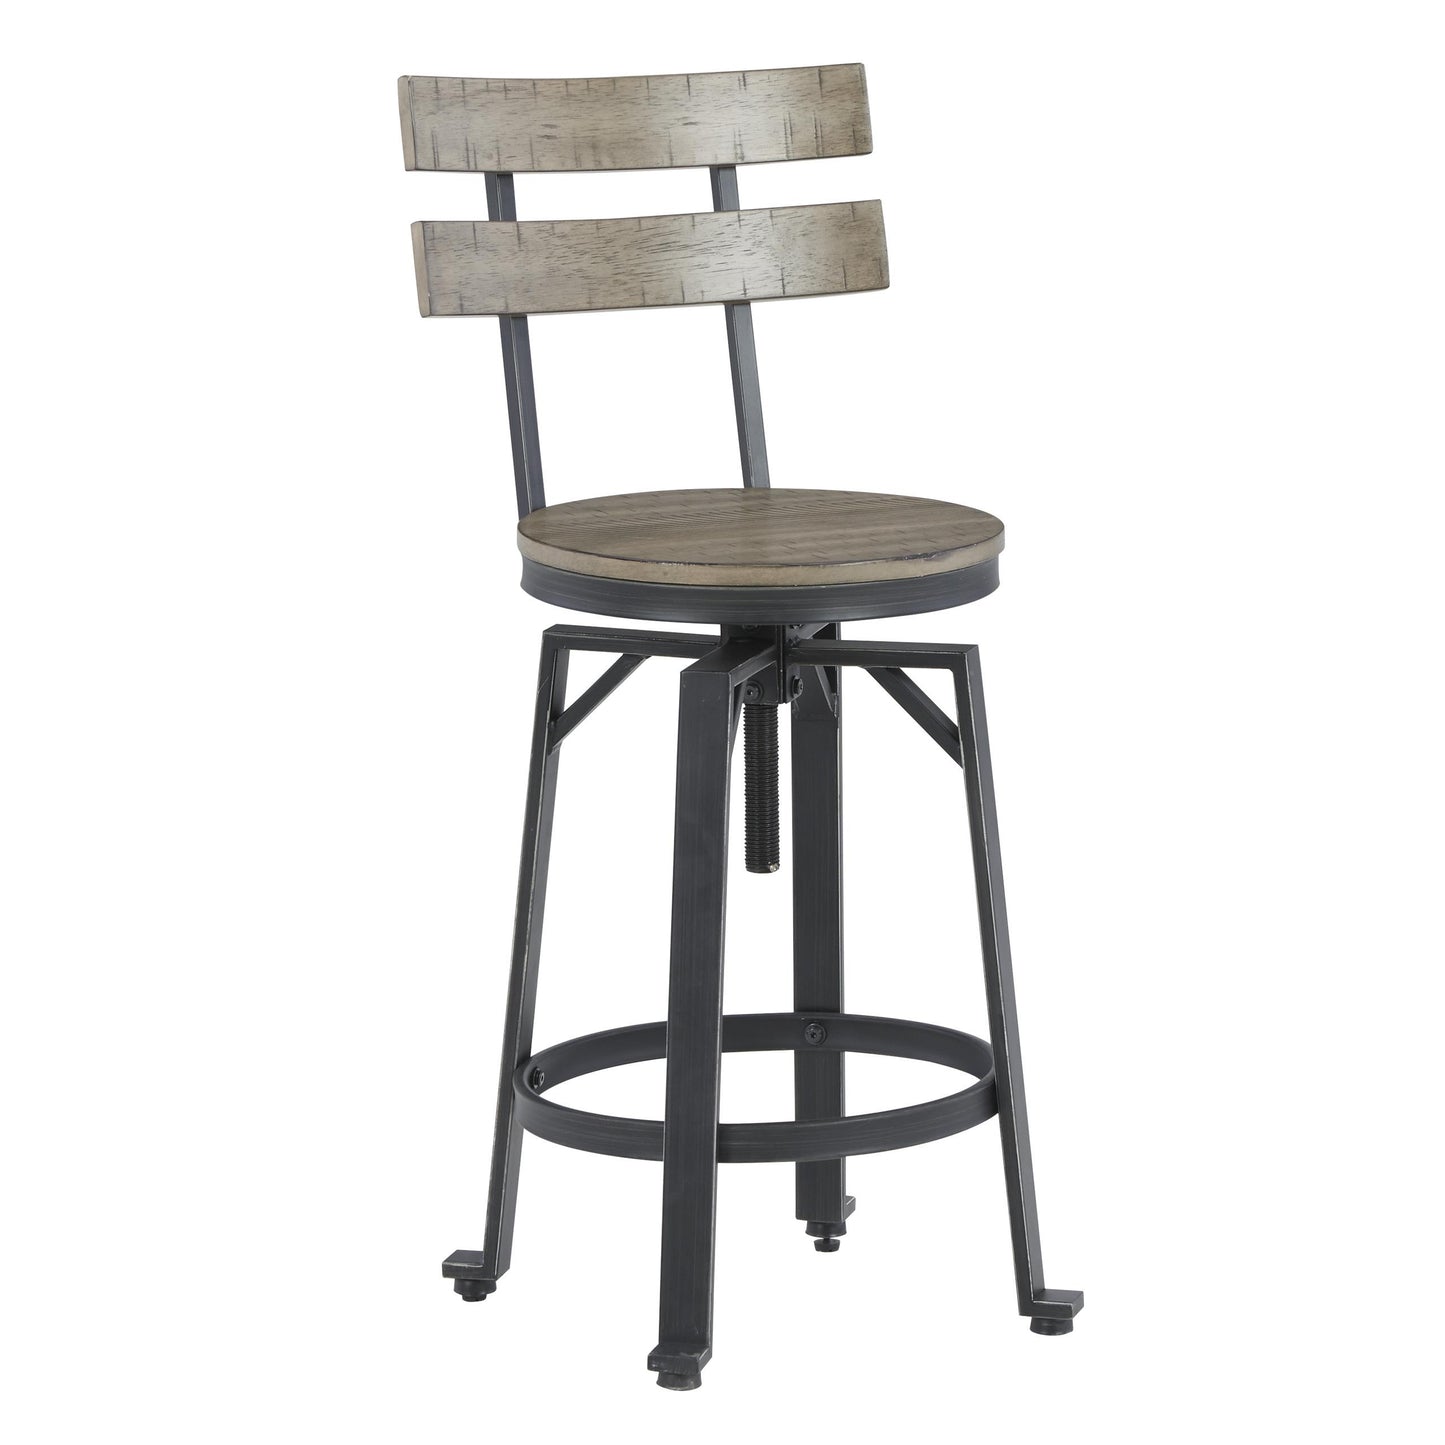 Signature Design by Ashley Lesterton Adjustable Height Stool D334-124 IMAGE 1